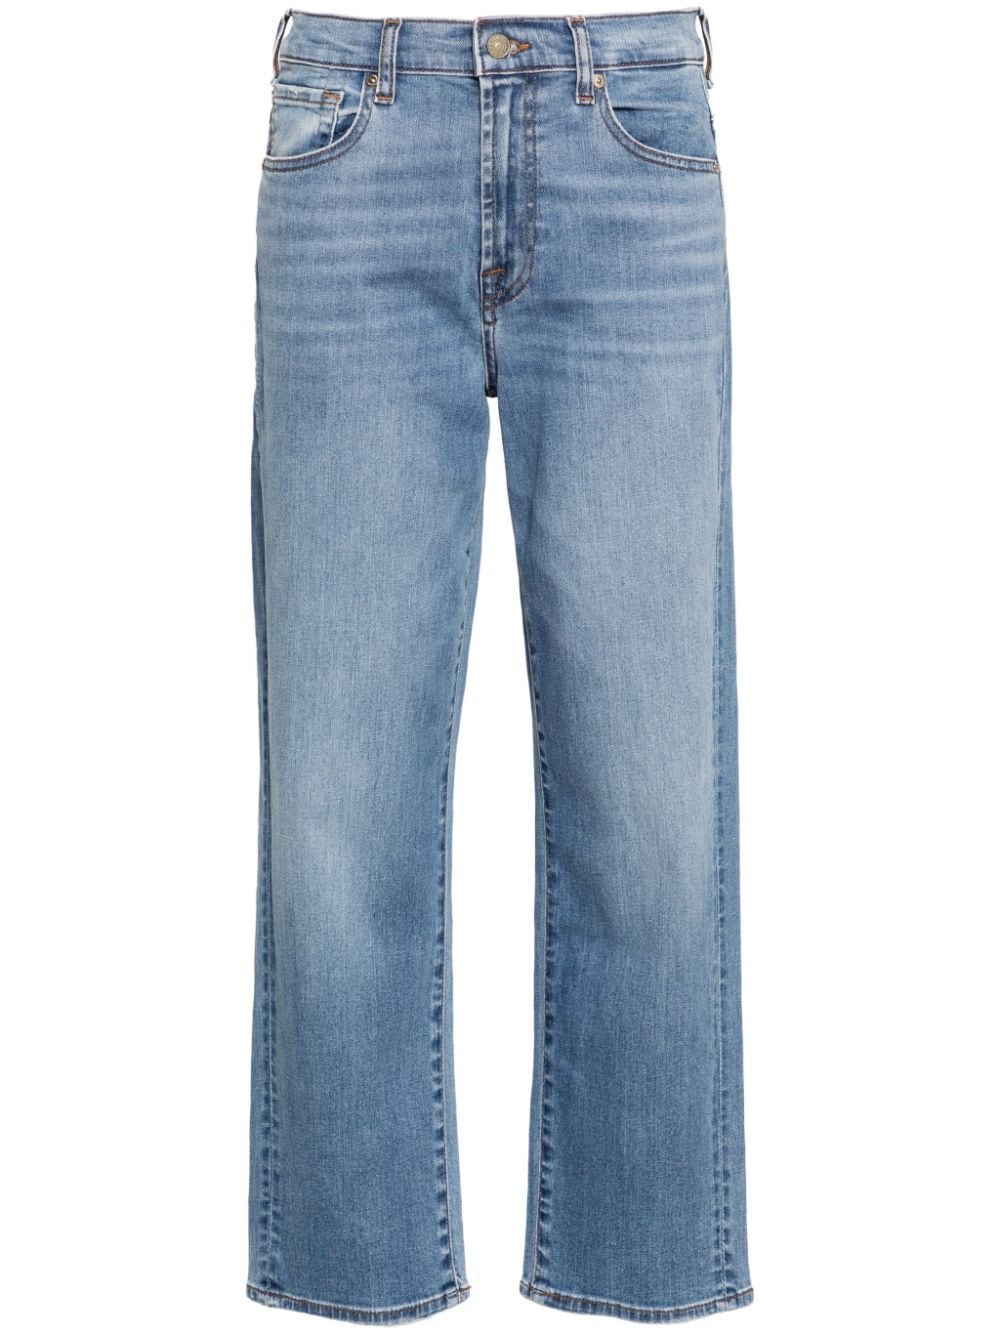 7 For All Mankind Modern mid-rise straight-leg jeans - Blue von 7 For All Mankind